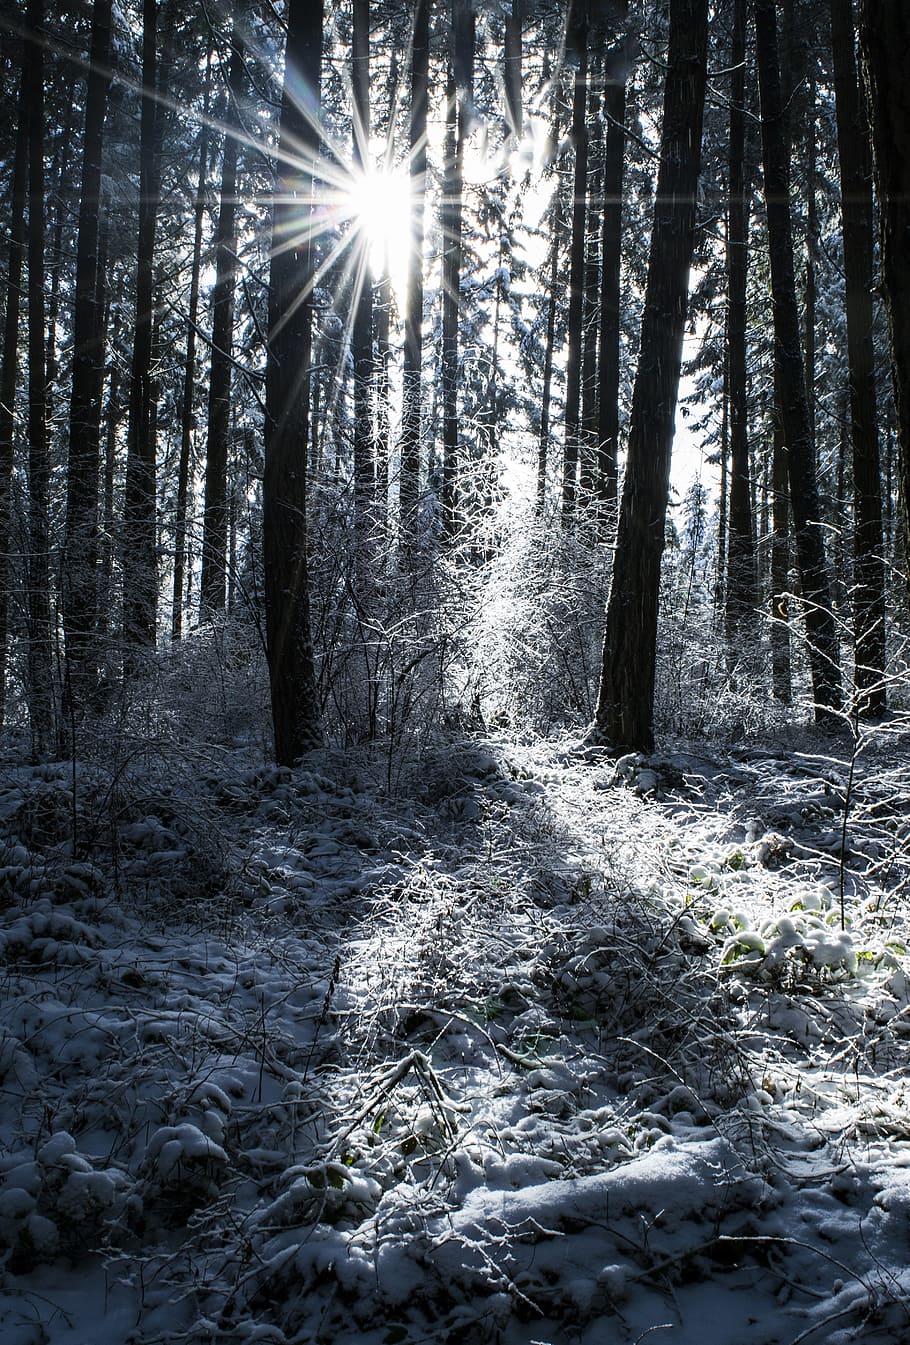 Snow, Trees, Winter, Nature, Landscape, cold, forest, frost, tree, woodland